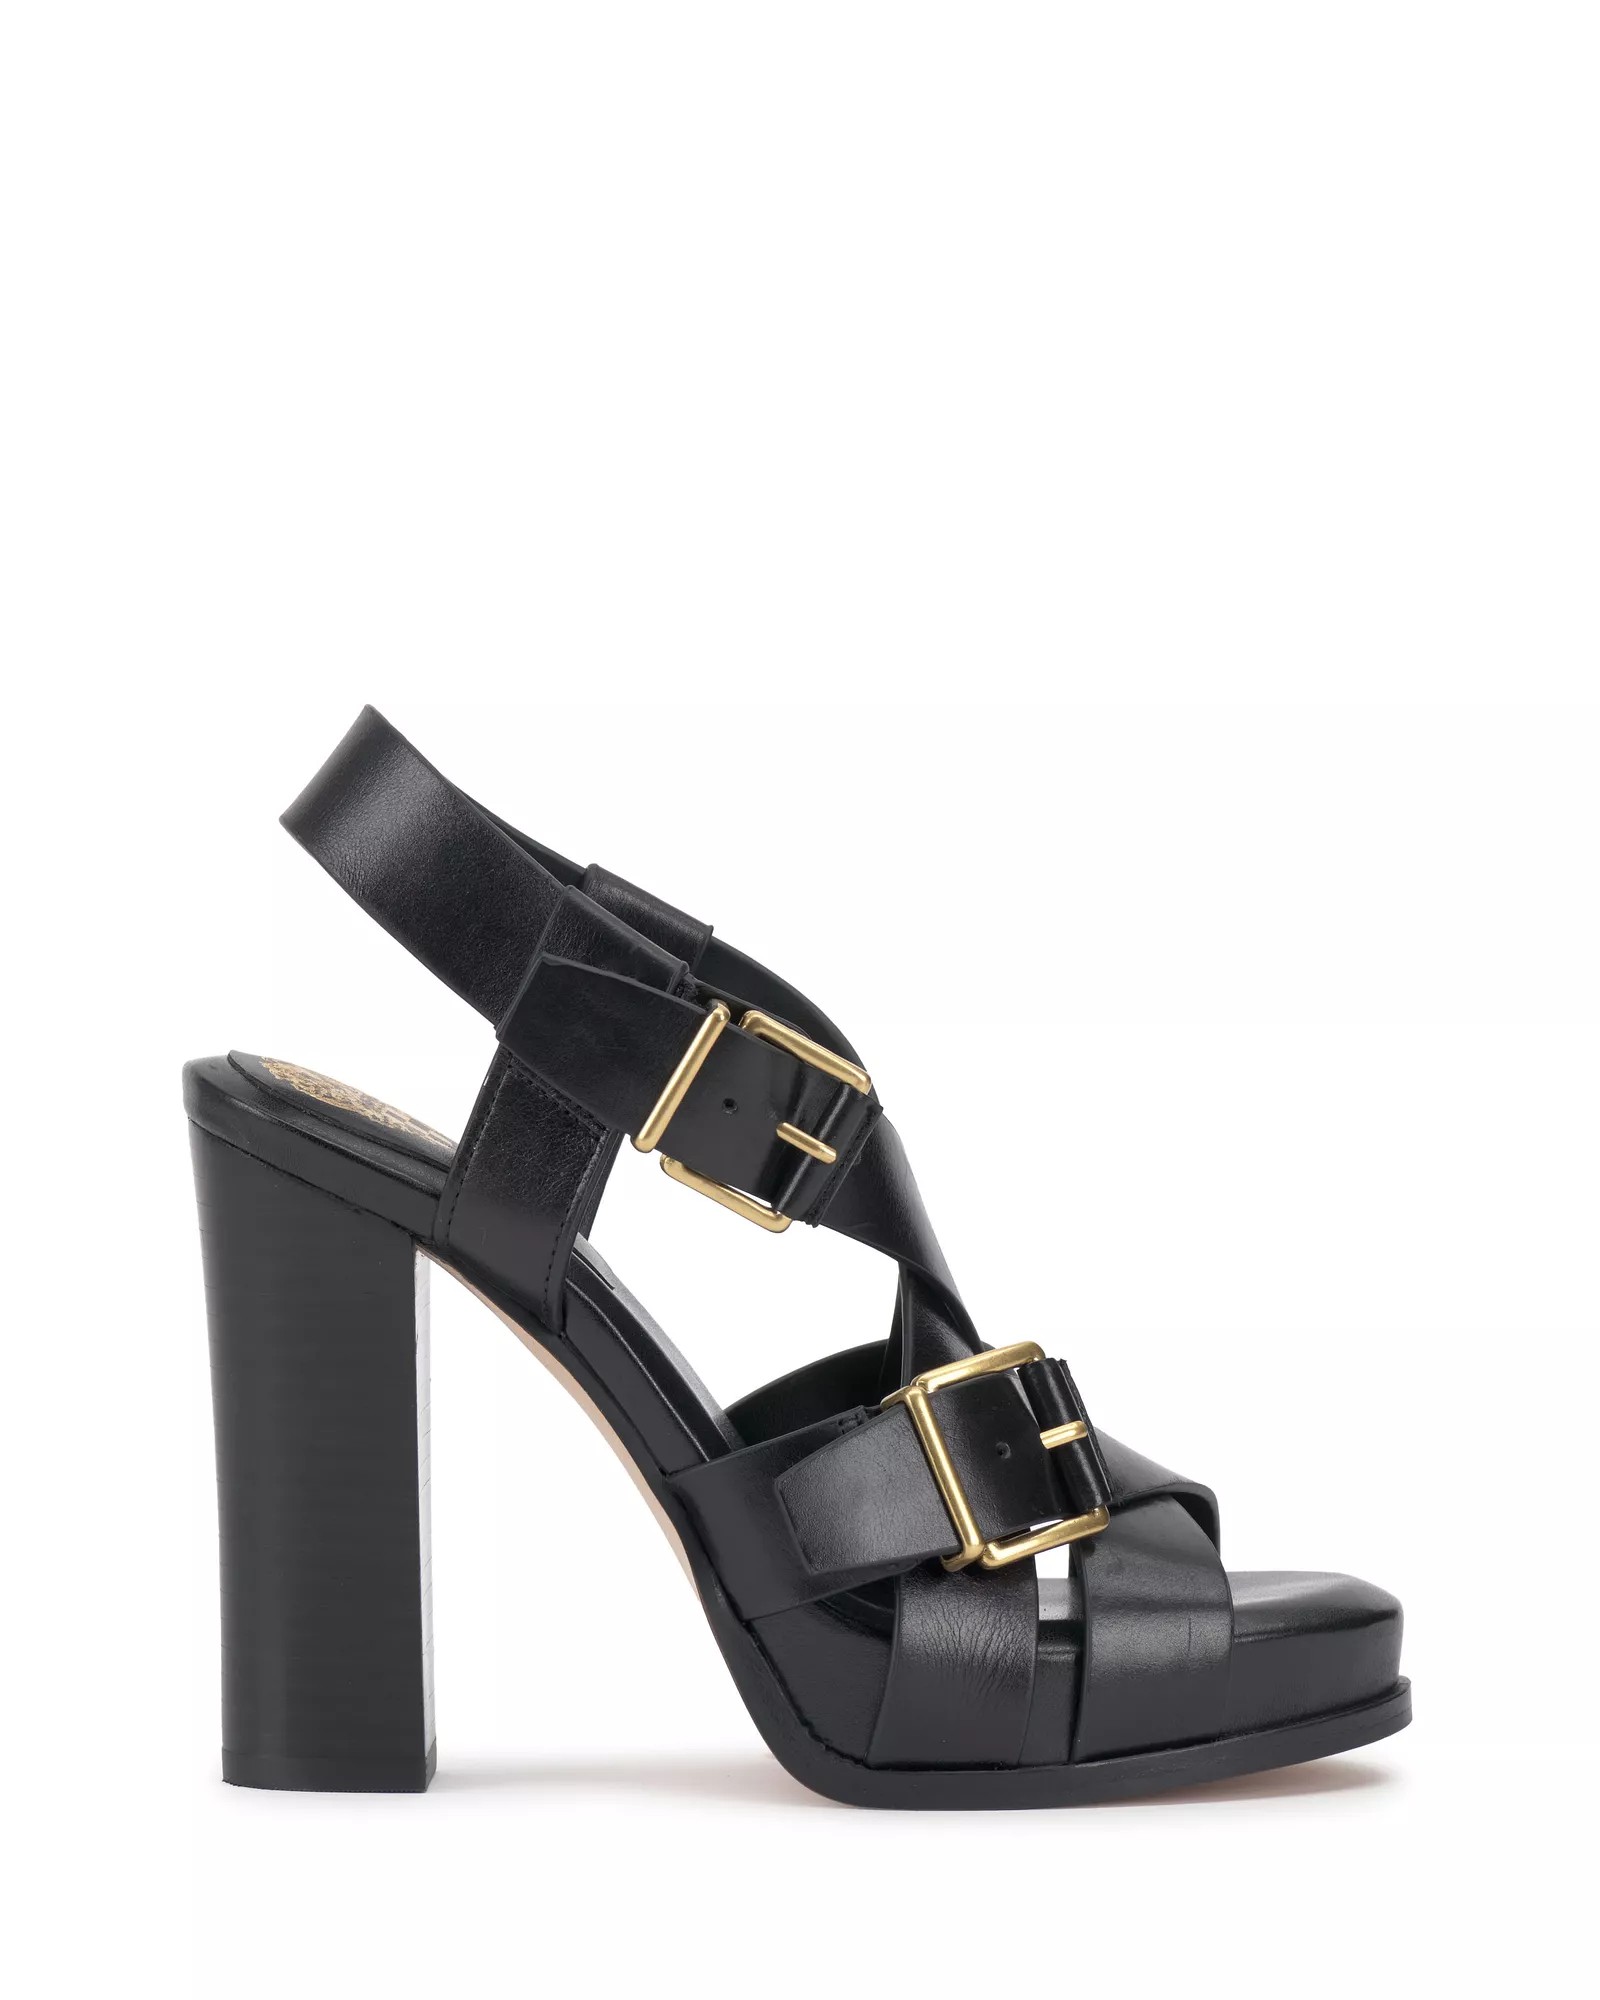 Vince Camuto Costanie Sandal